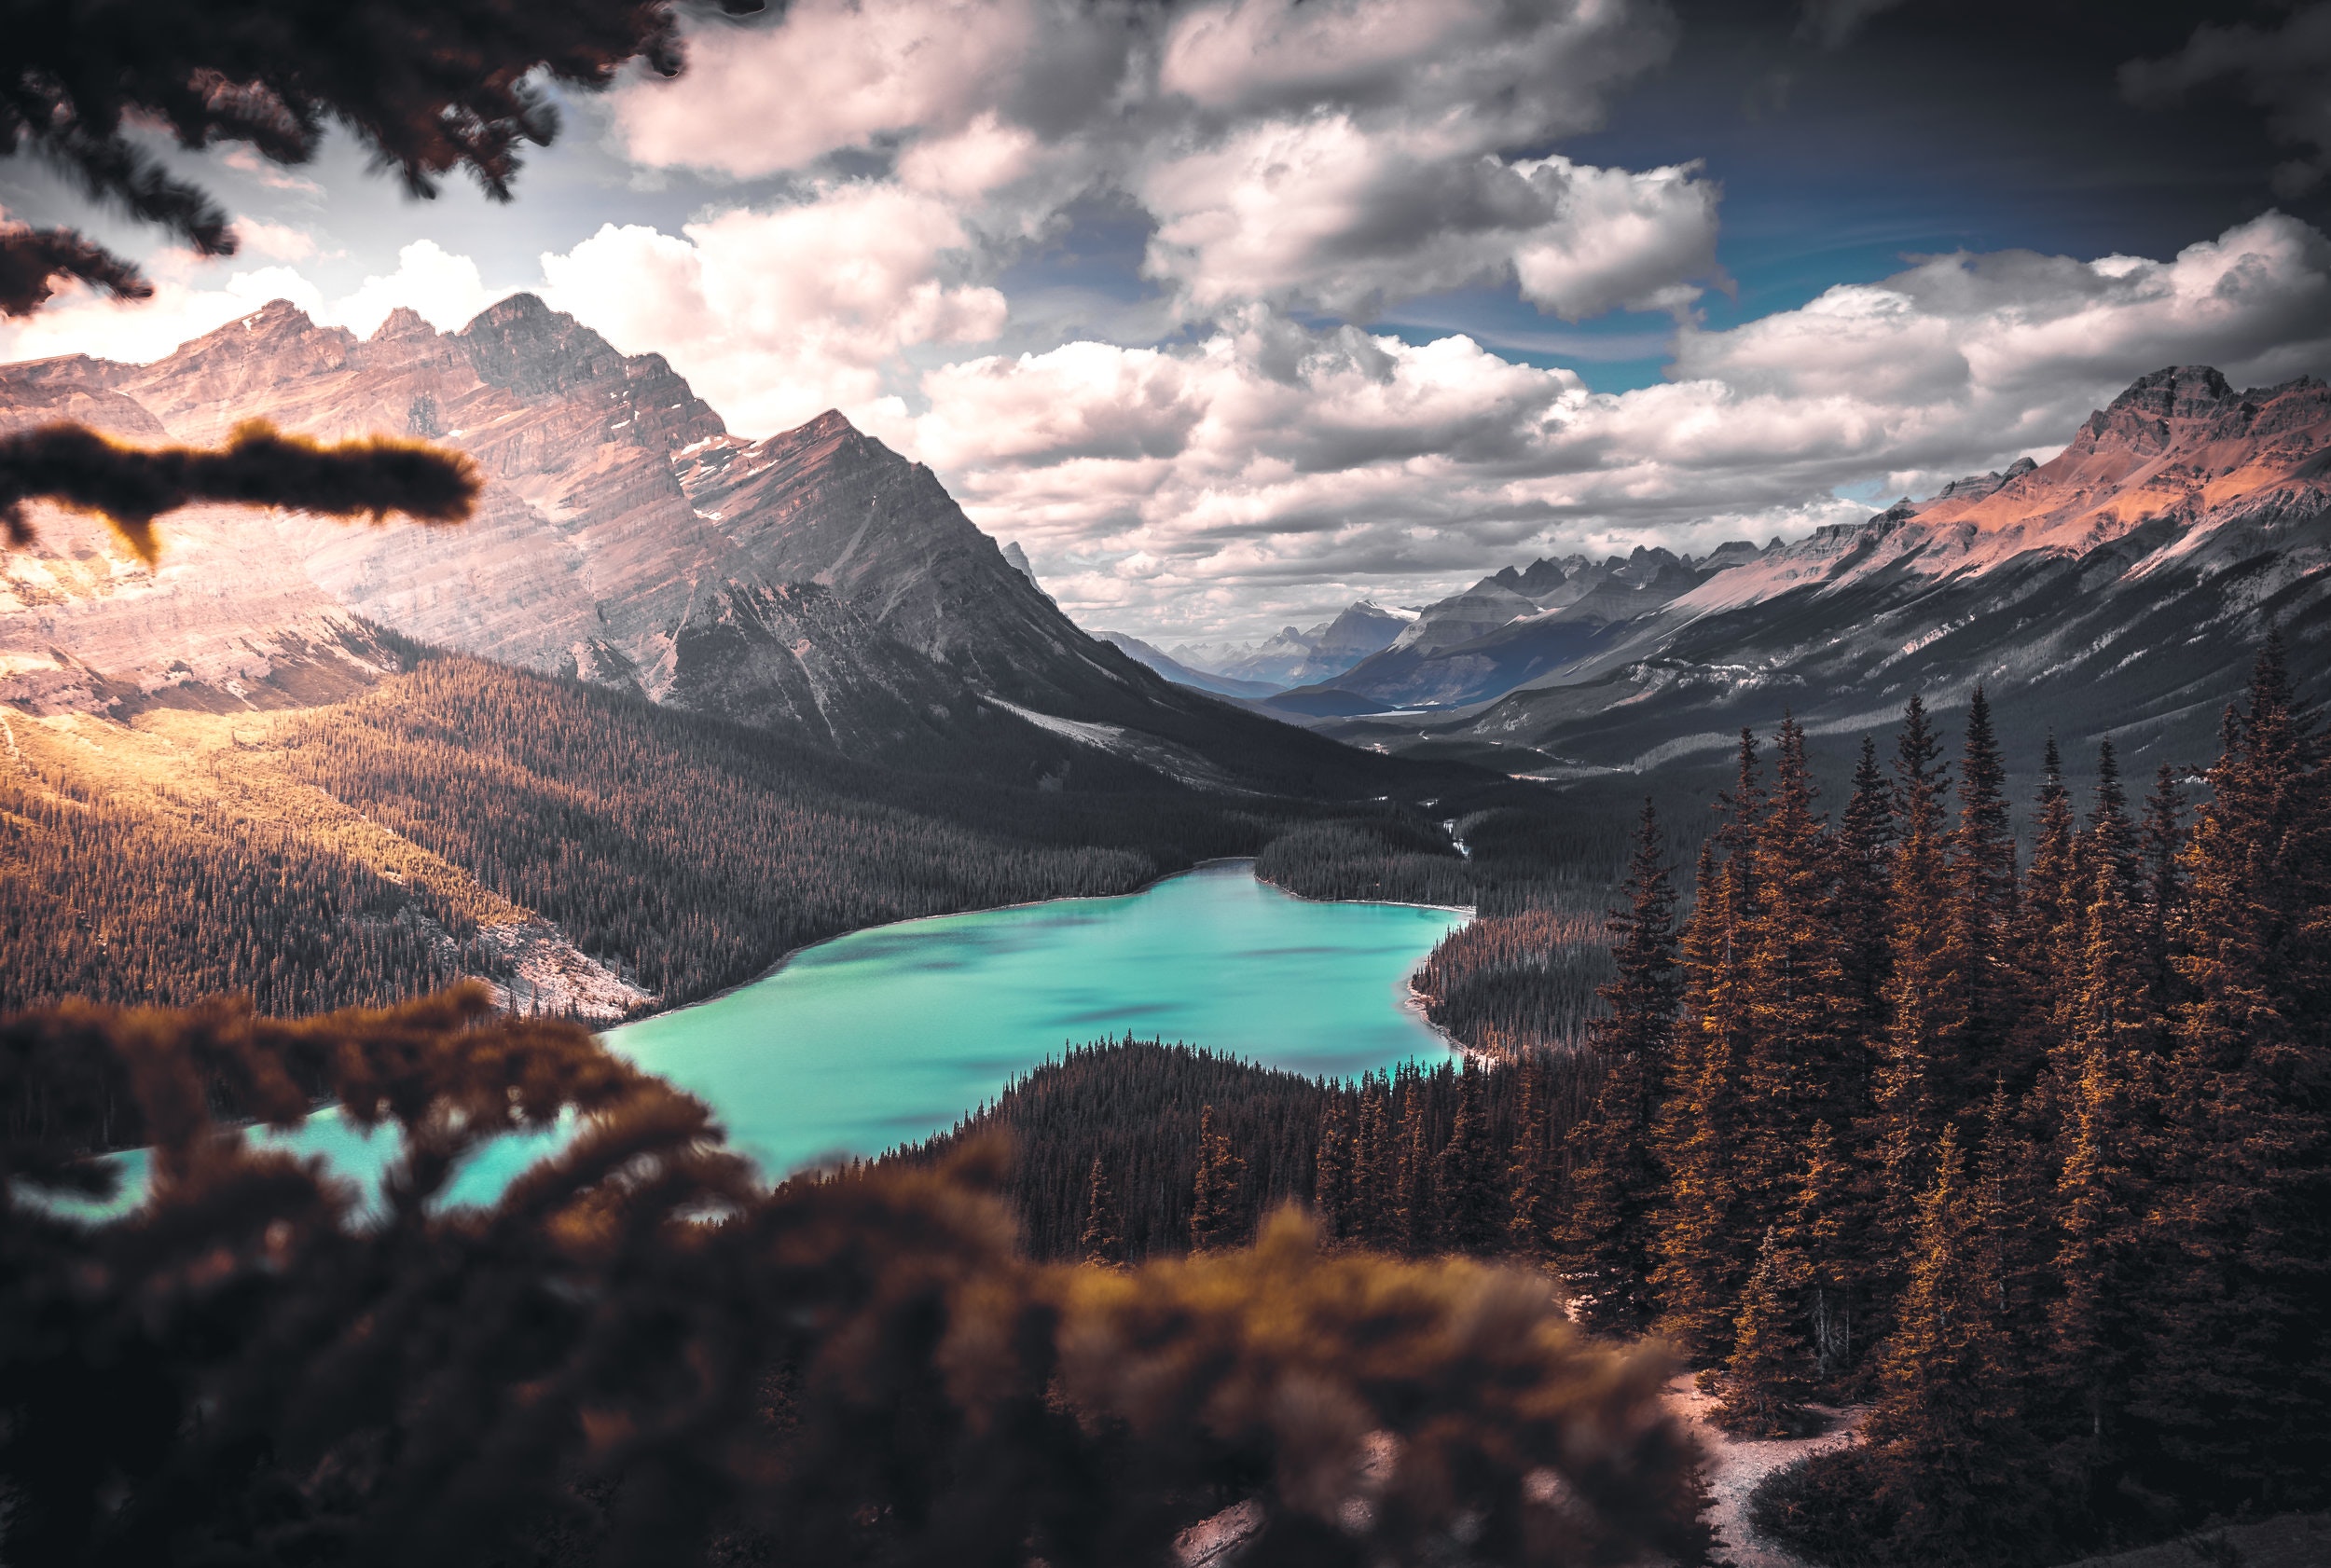 Wallpapers scenery landscape photography on the desktop